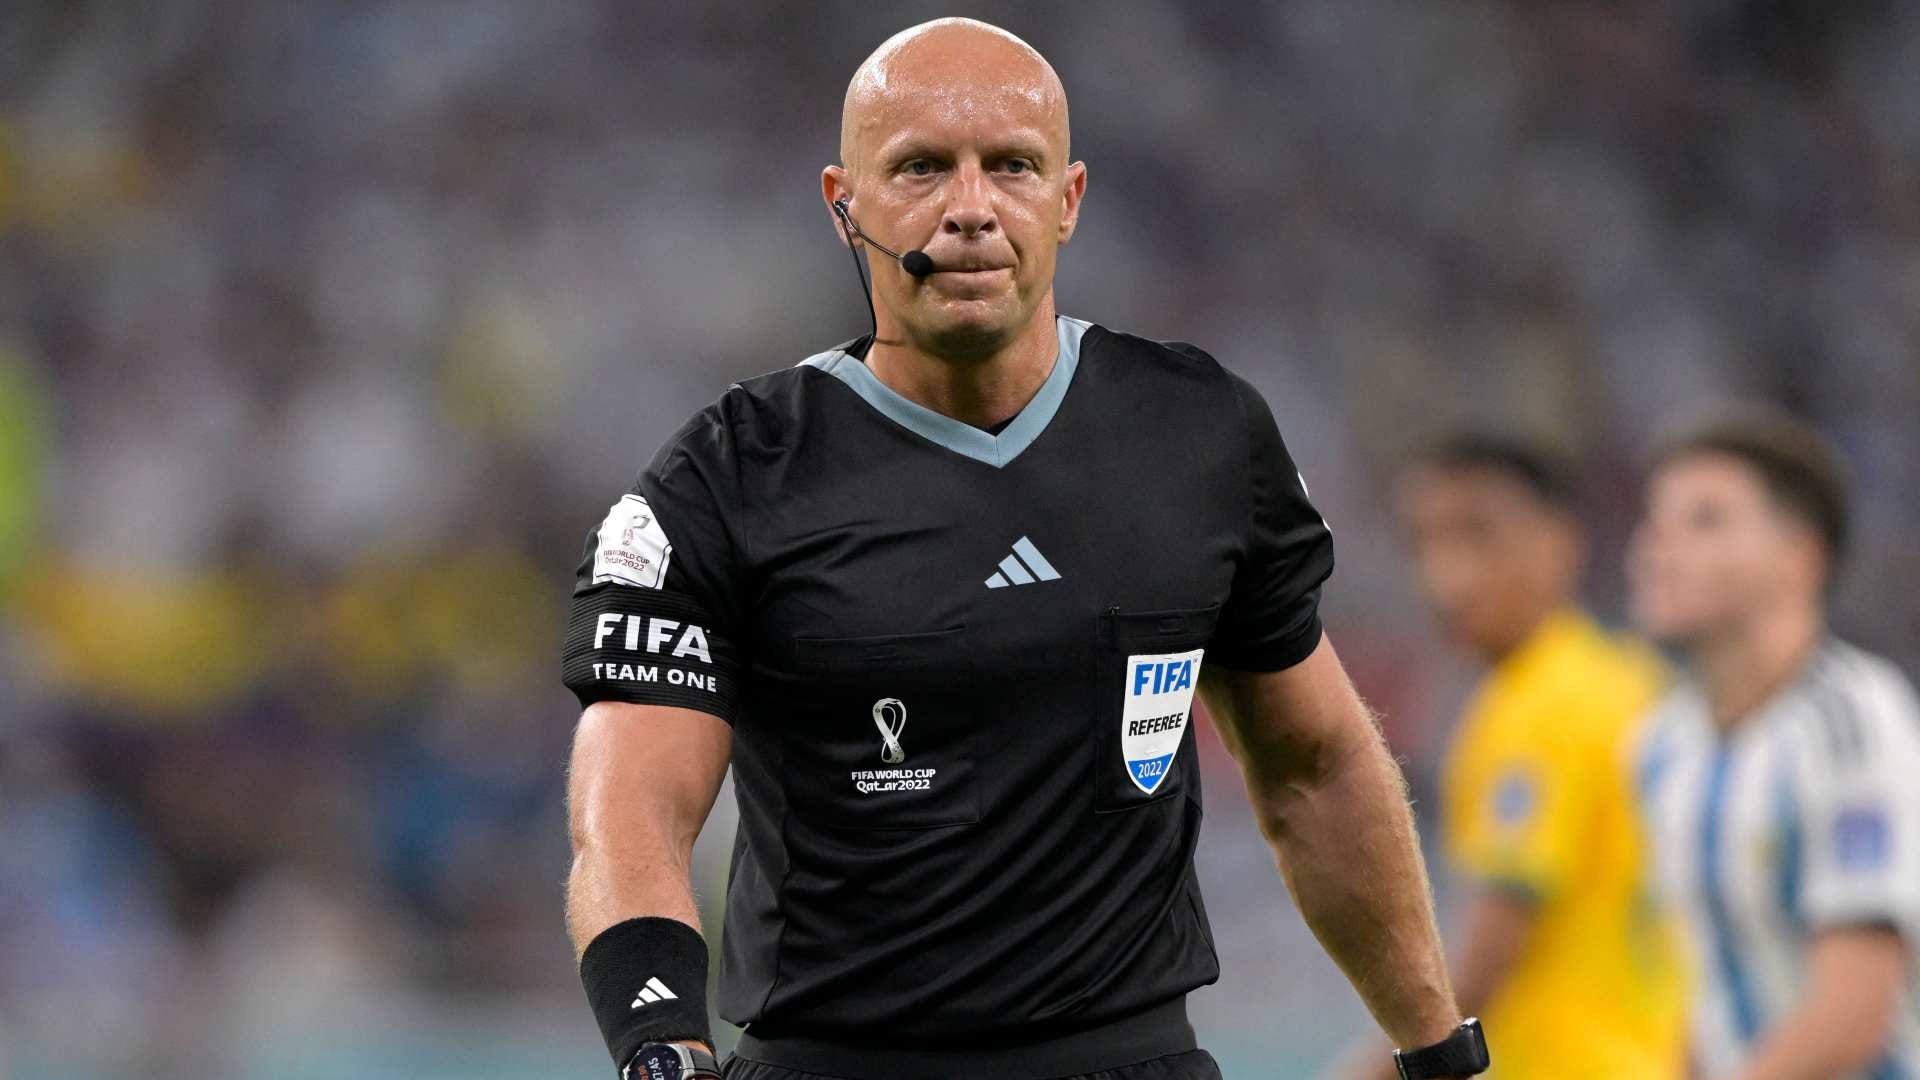 who-is-champions-league-final-referee-szymon-marciniak-and-amp-why-was-uefa-considering-dropping-him-at-the-very-last-moment-due-to-far-right-controversy-or-goal-com-india